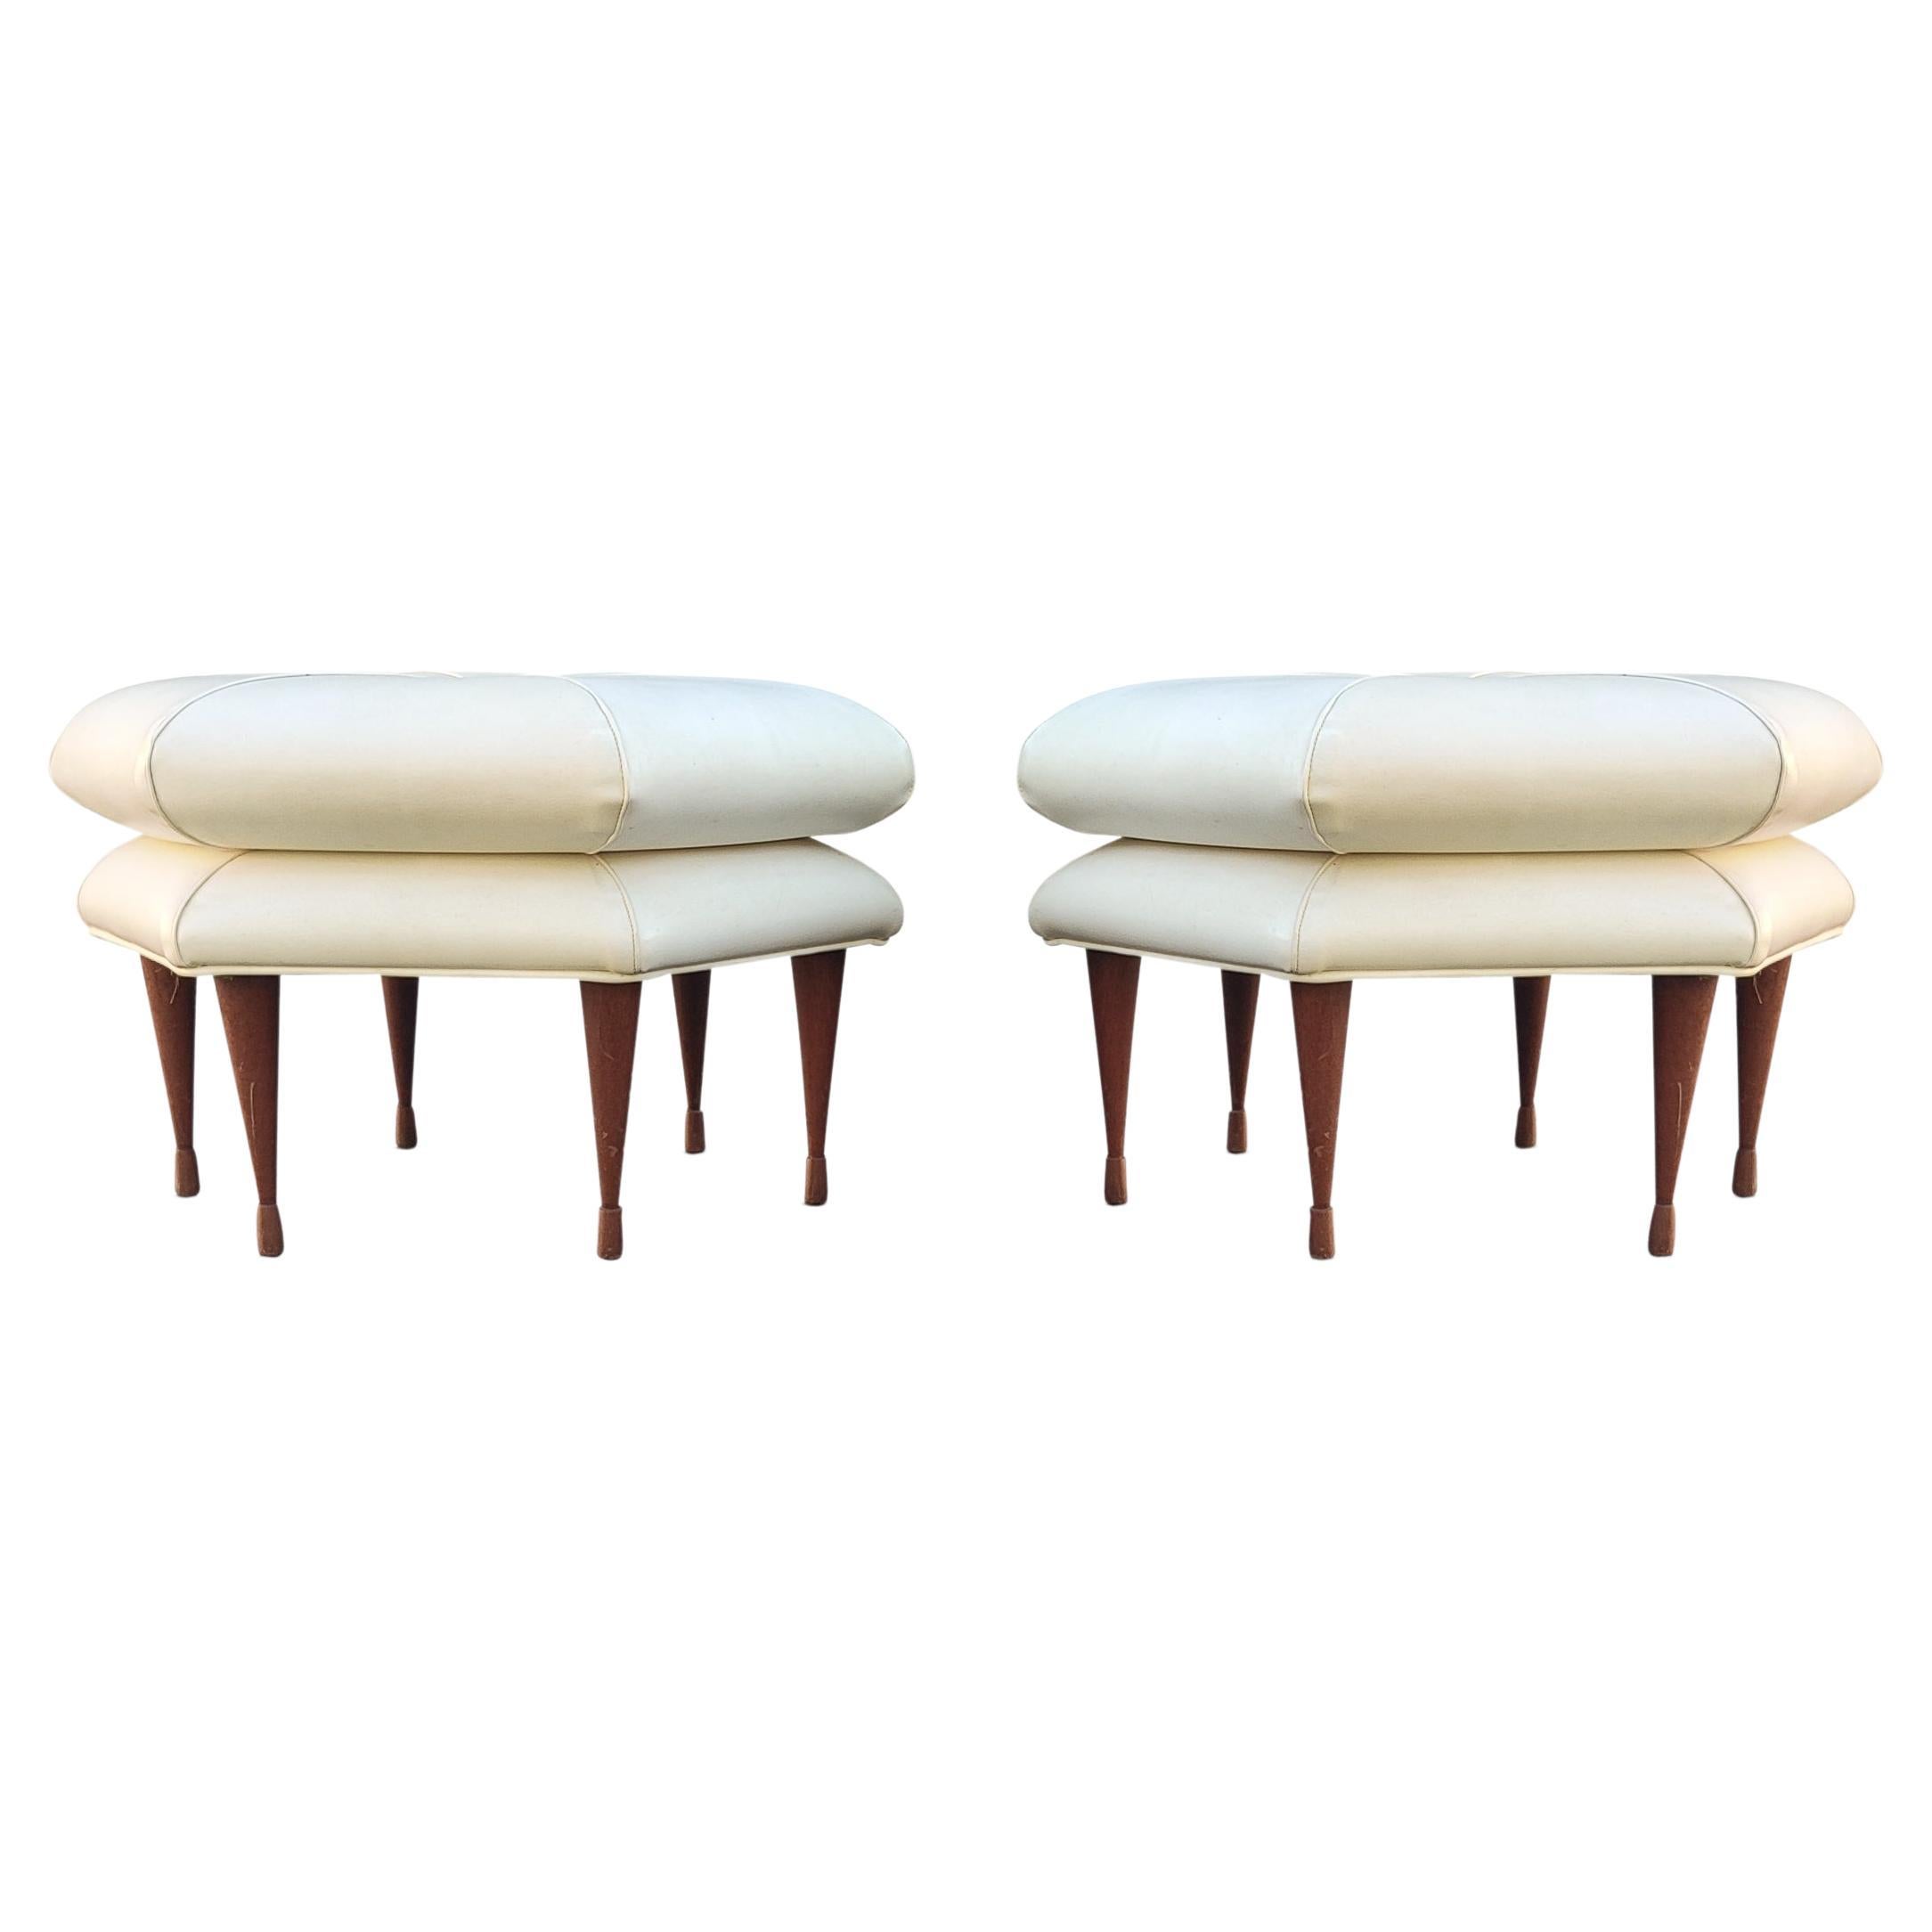 Mid-20th Century Pair of Selig Hexagon Form Ottoman or Pouffe Original Leatherette on Walnut Legs For Sale